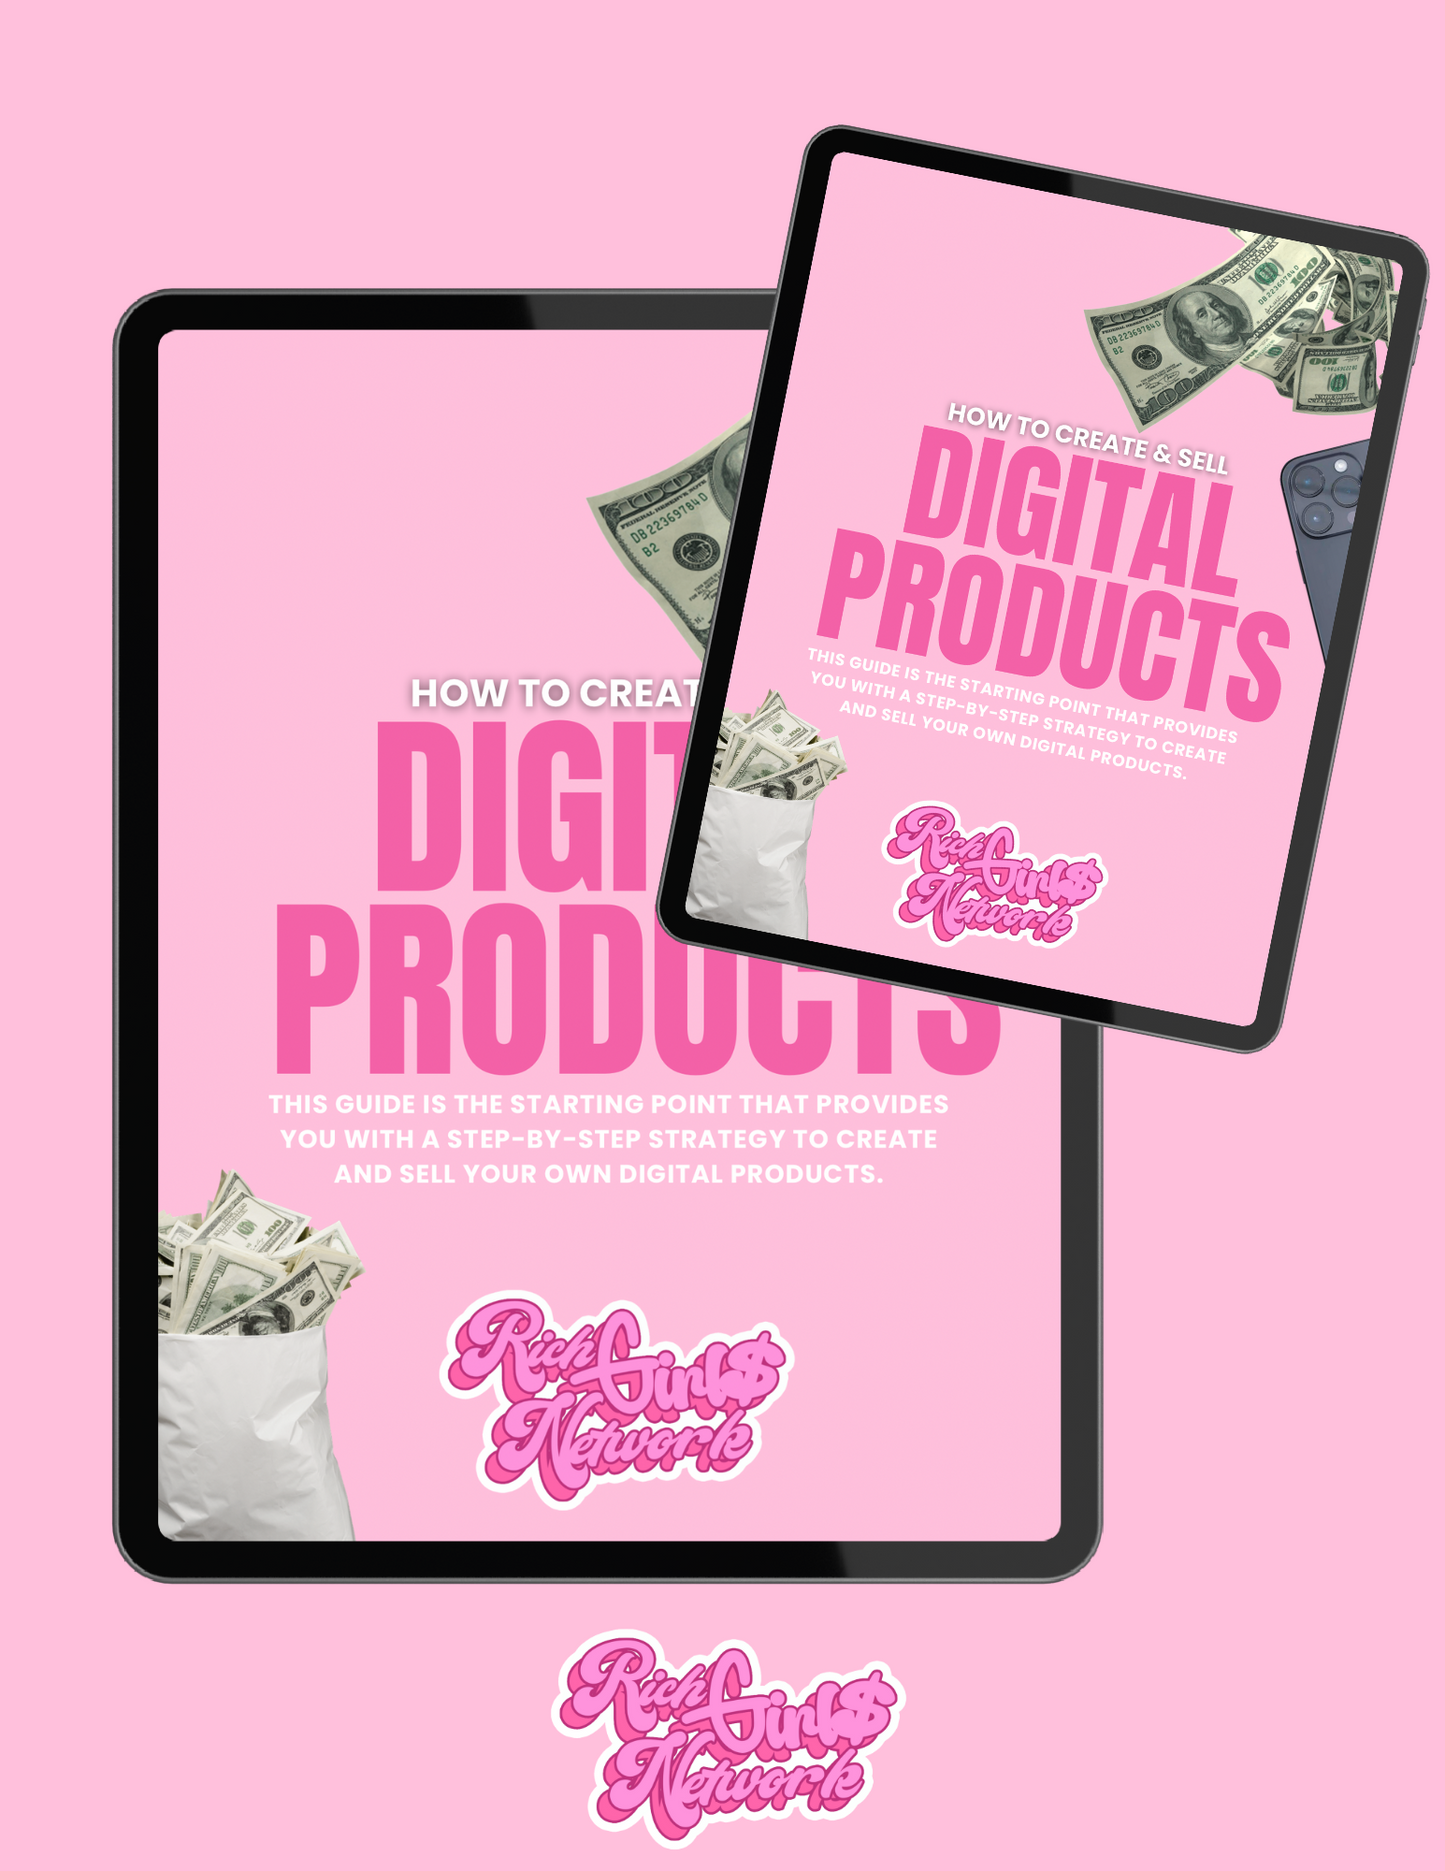 How to create digital products from SCRATCH